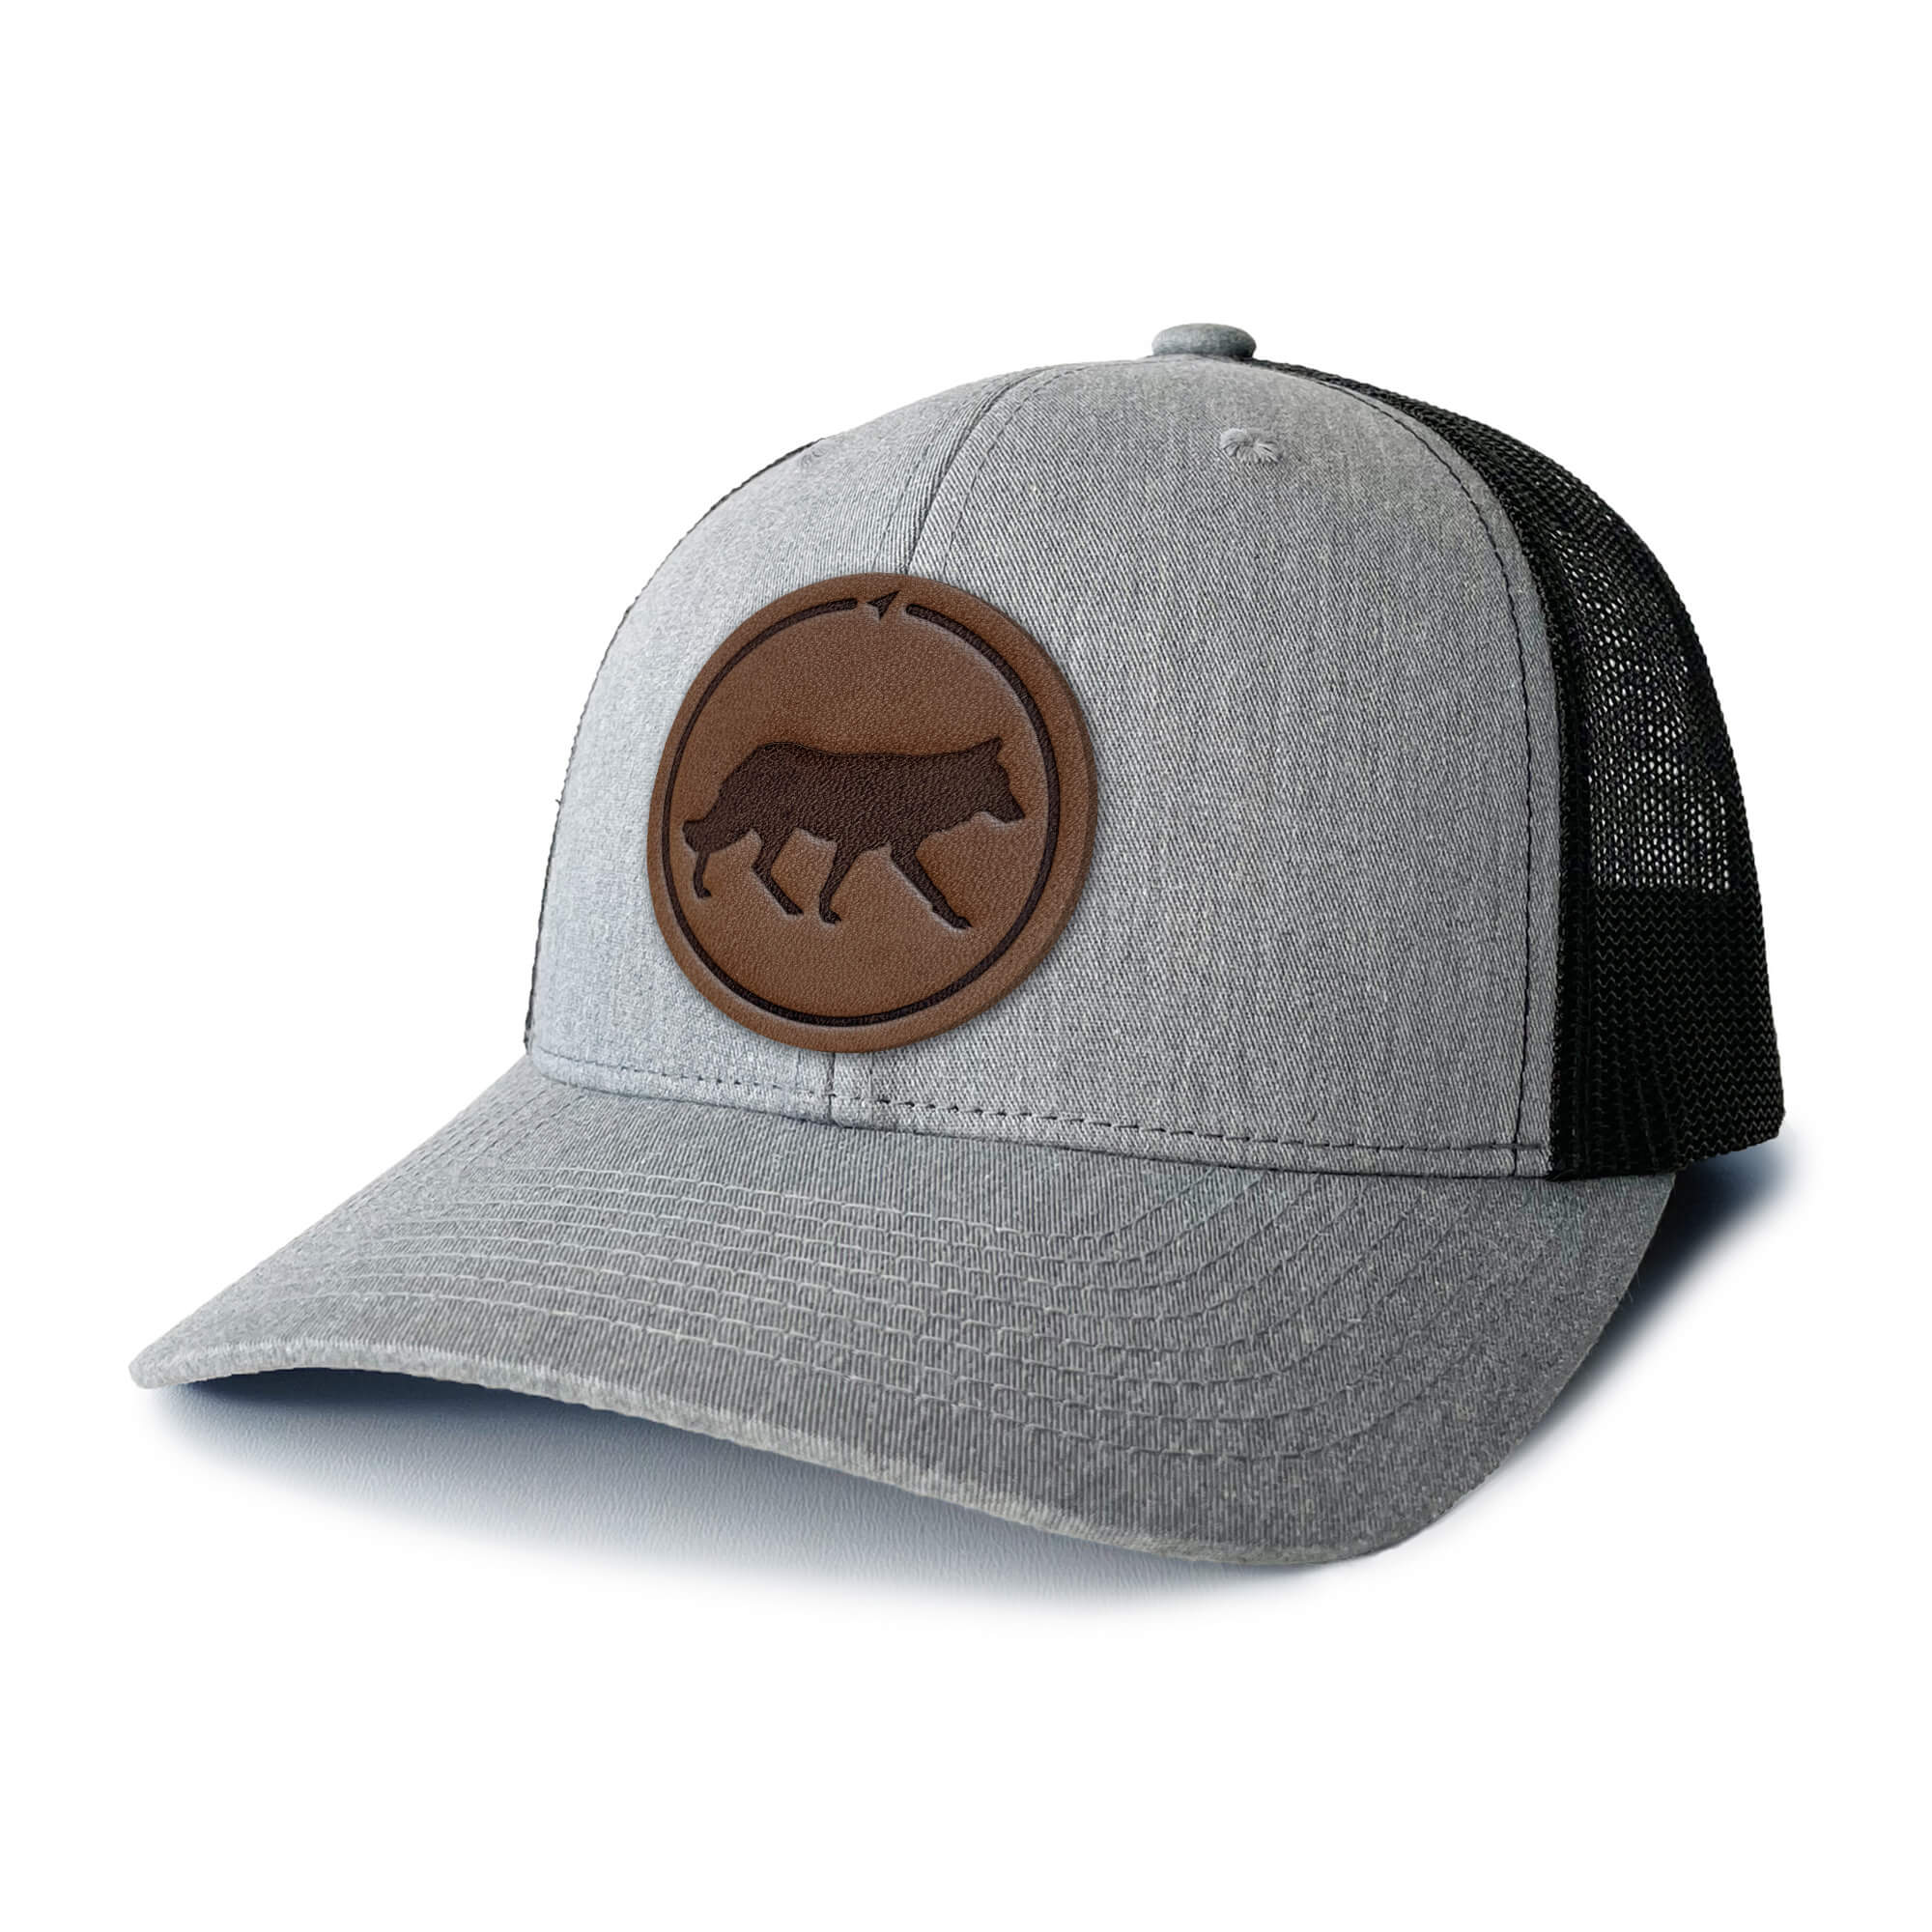 Heather Grey trucker hat with full-grain leather patch of Wolf | BLACK-004-007, CHARC-004-007, NAVY-004-007, HGREY-004-007, MOSS-004-007, BROWN-004-007